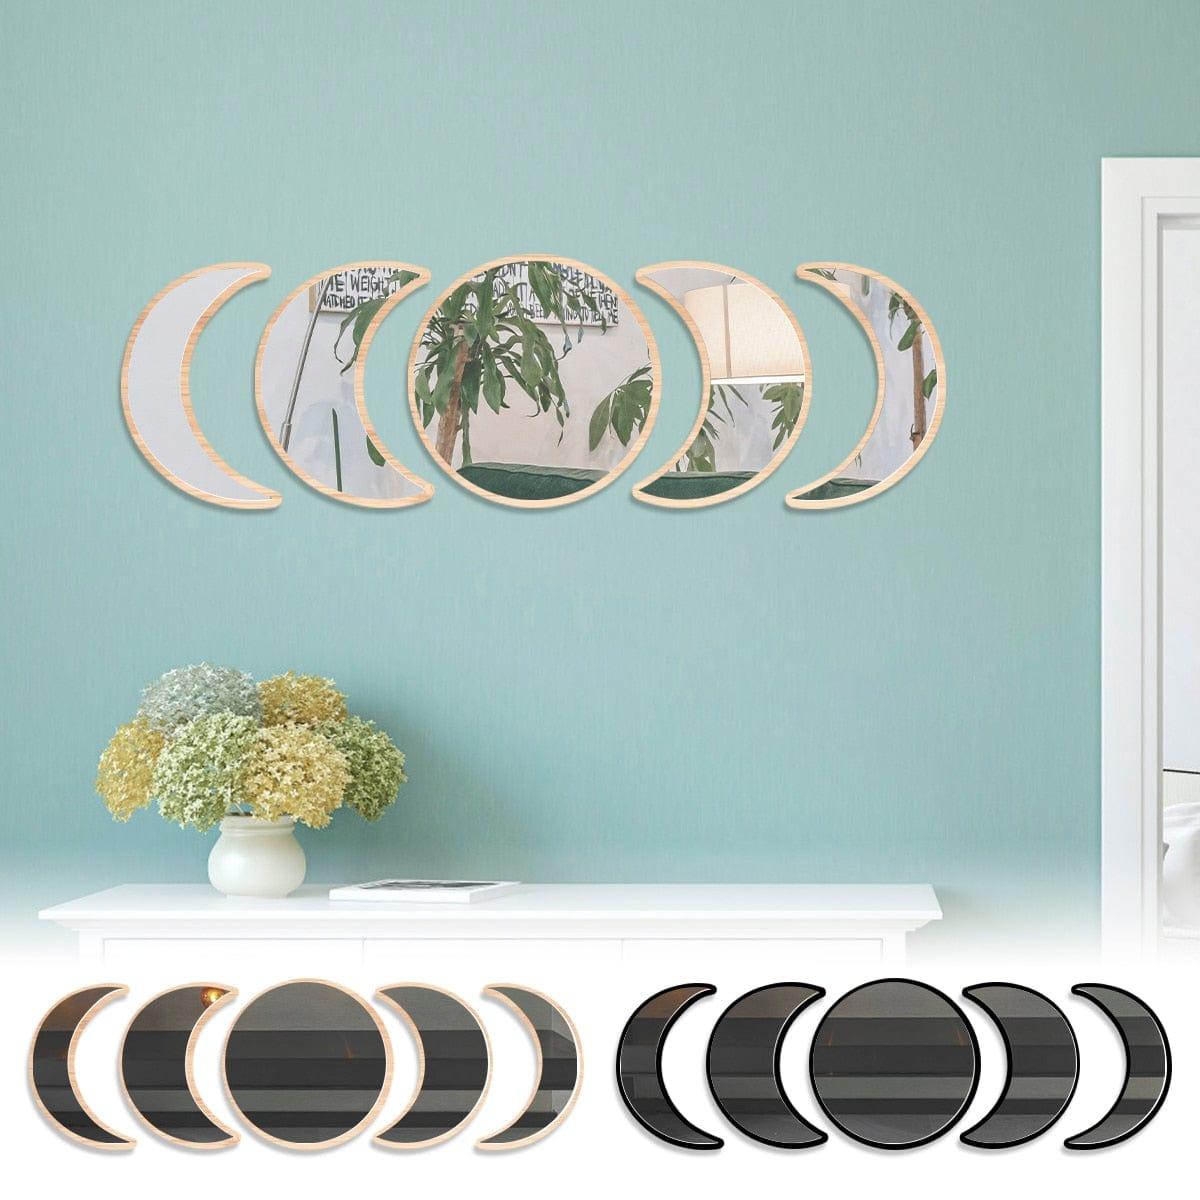 Shop 0 5pcs 3D Wooden Moon Phases Wall Decorative Natural Design Moon Cycle Variation Decorative Creative Bohemian Wall-mounted Decor Mademoiselle Home Decor